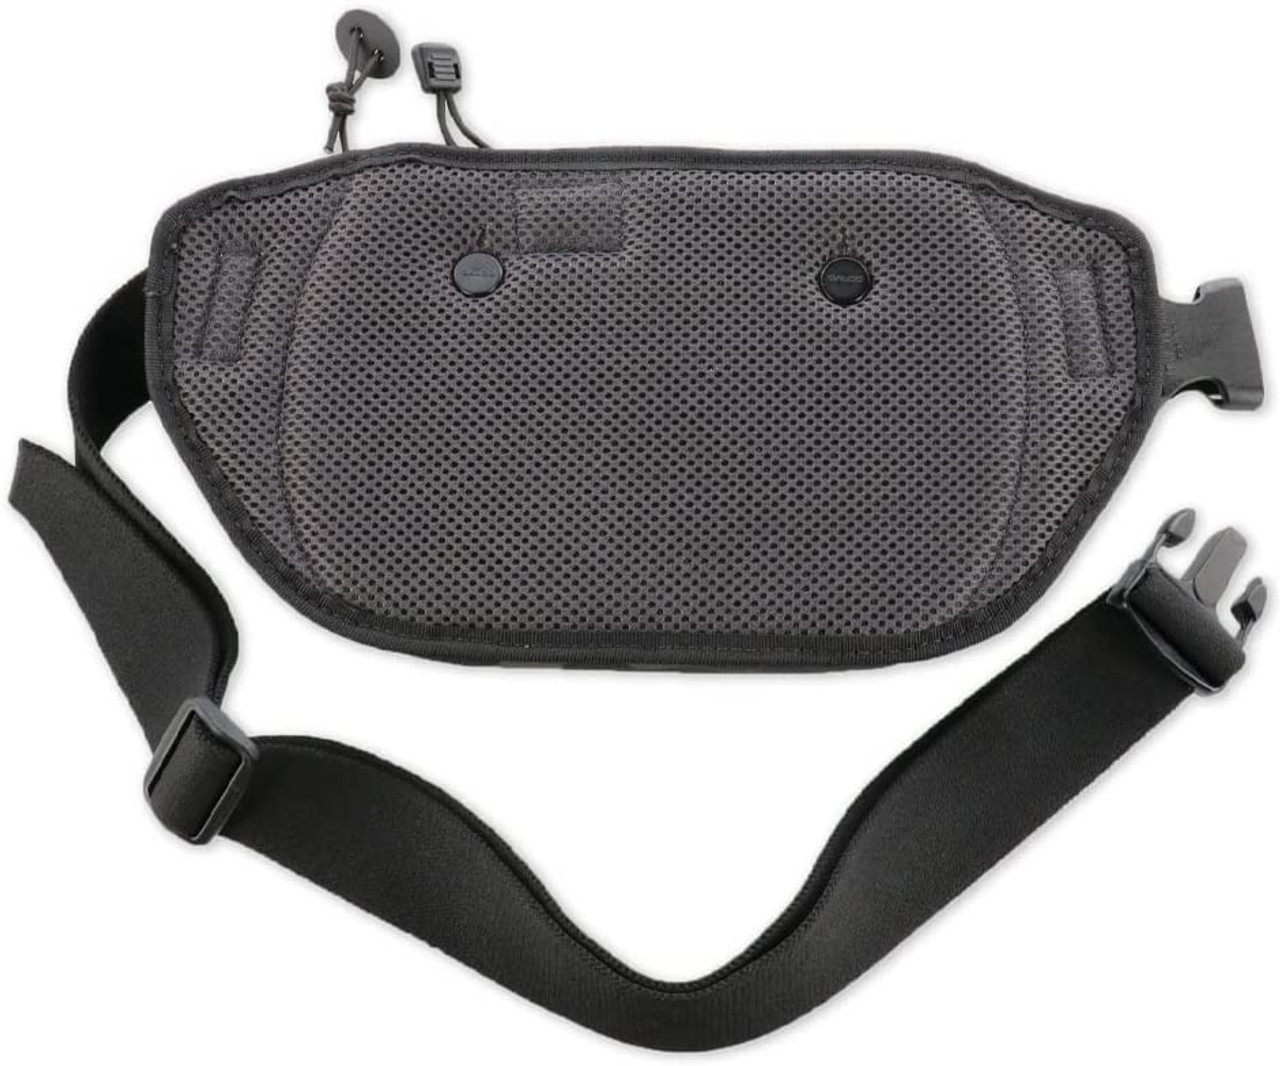 Galco Fastrax PAC Gun Concealing Waistpack - Adjustable Fit Ambid Multicam